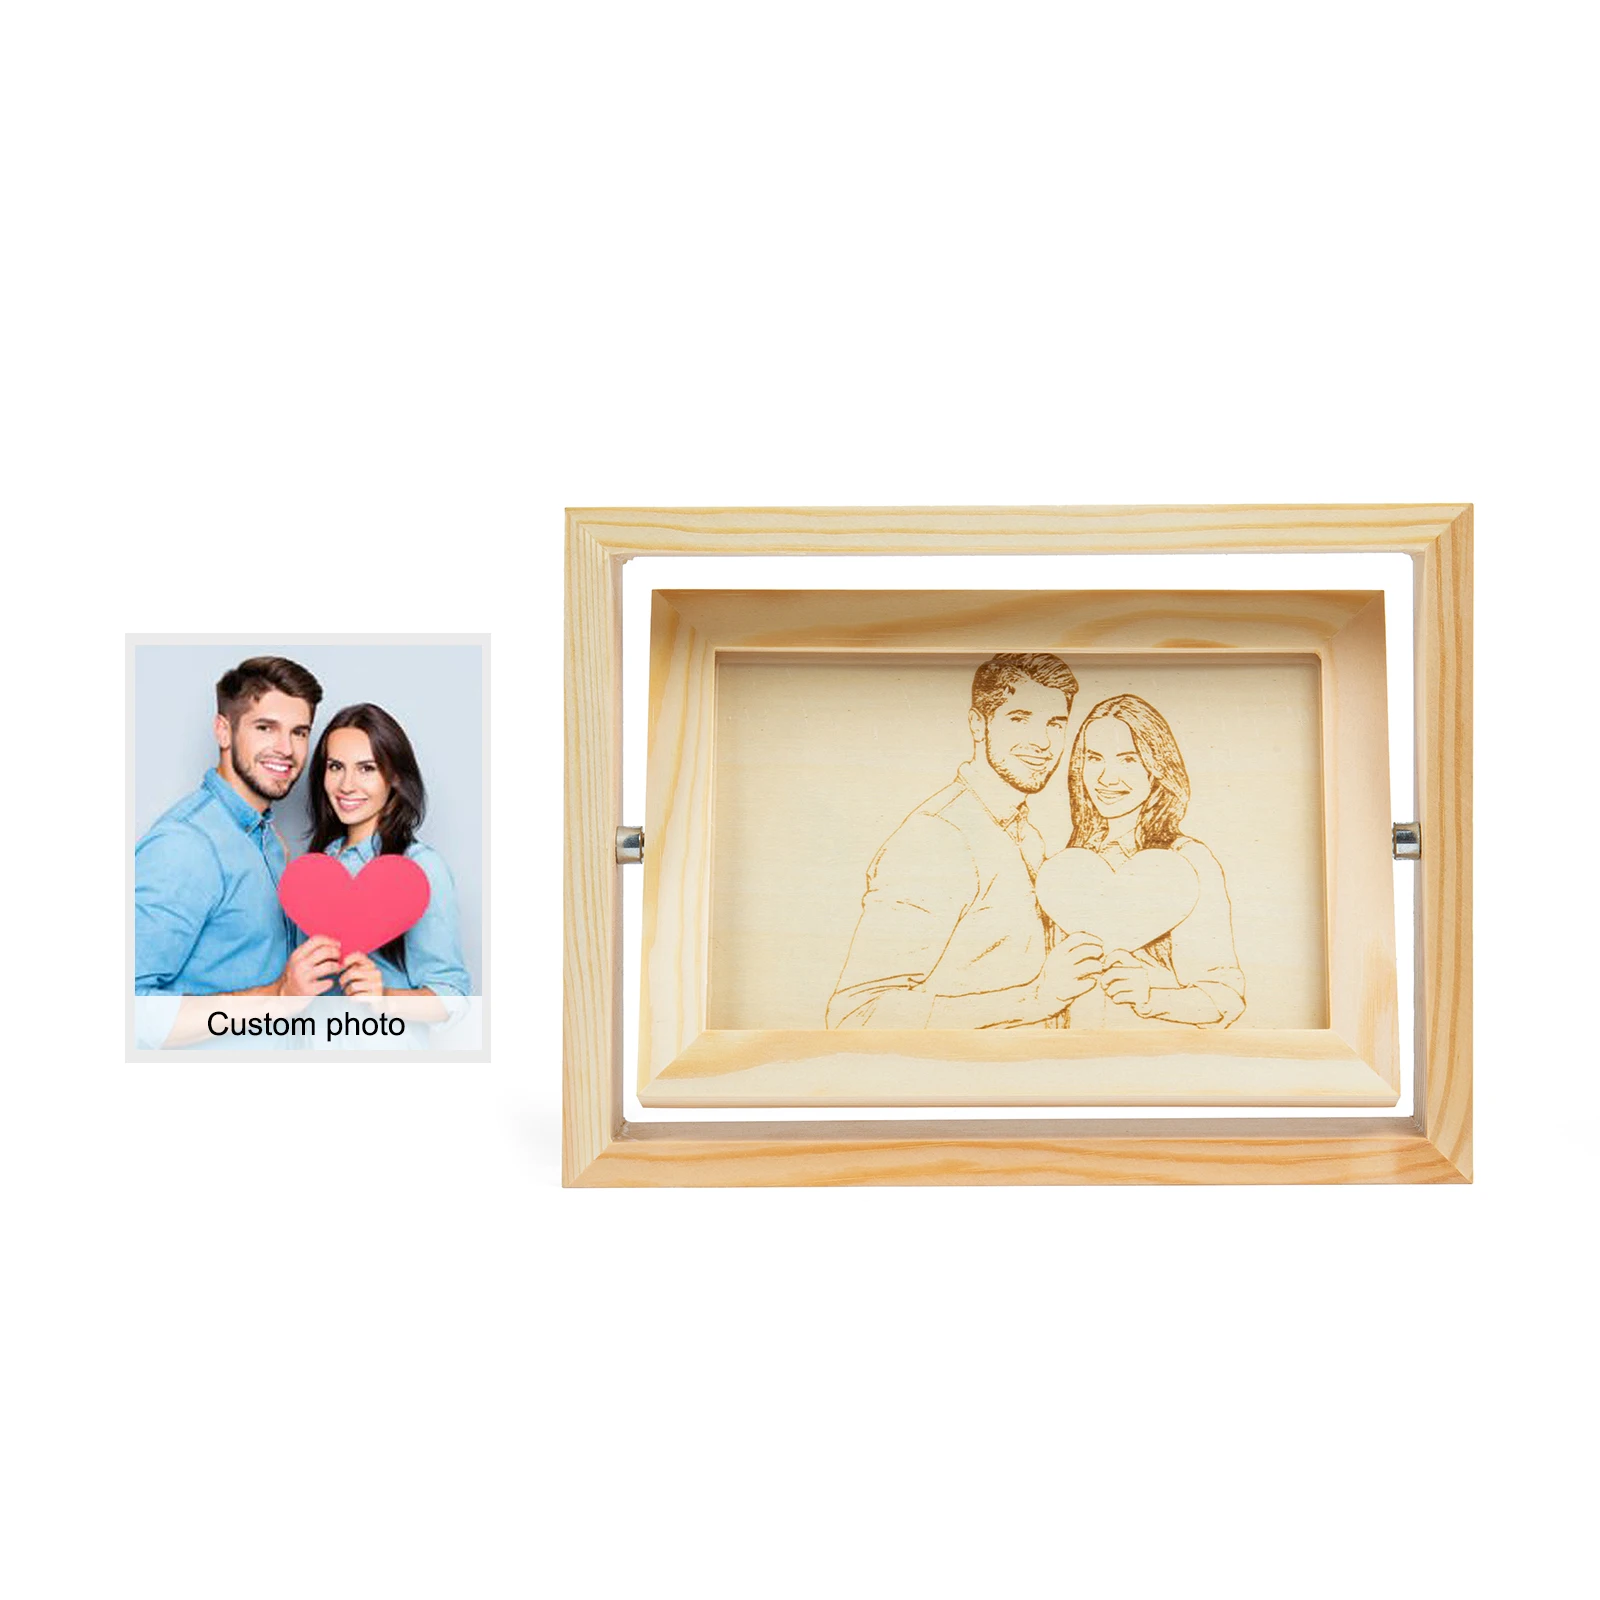 Personalized Wooden Custom Photo Frame Sketch Effect 5 Inches Desktop Ornament For Family Anniversary Birthday Decorations